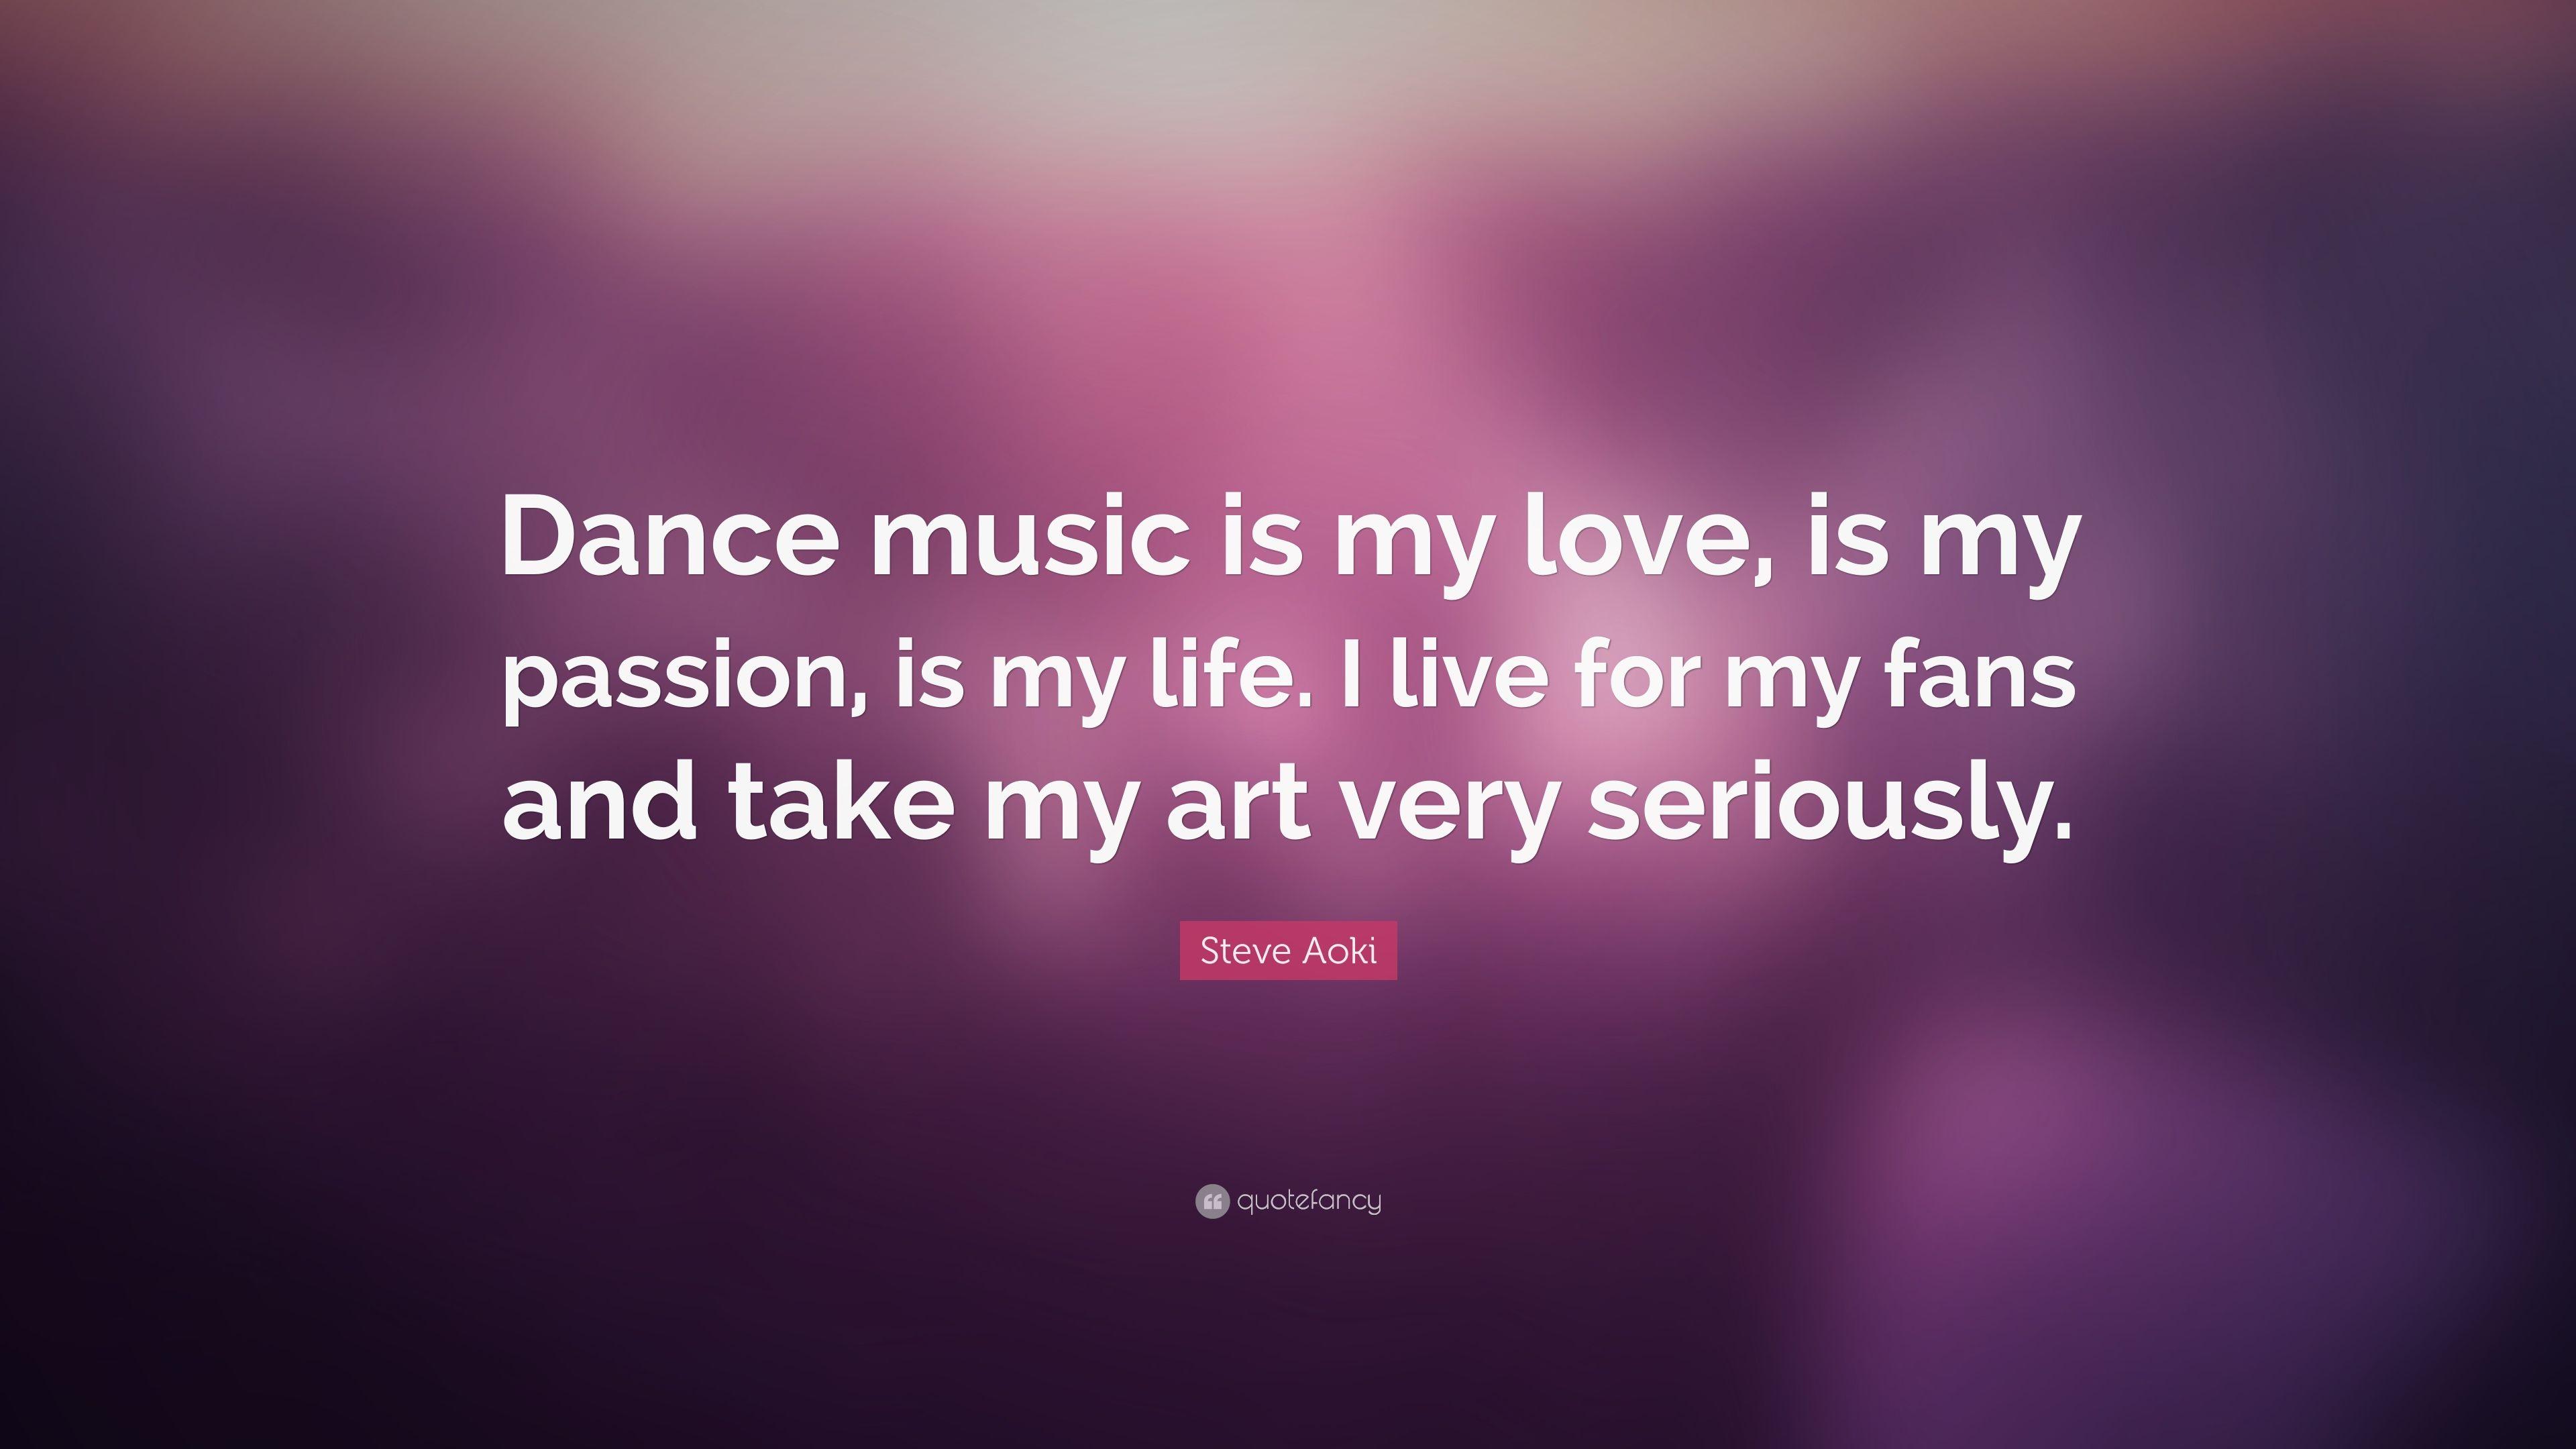 Steve Aoki Quote: “Dance music is my love, is my passion, is my life